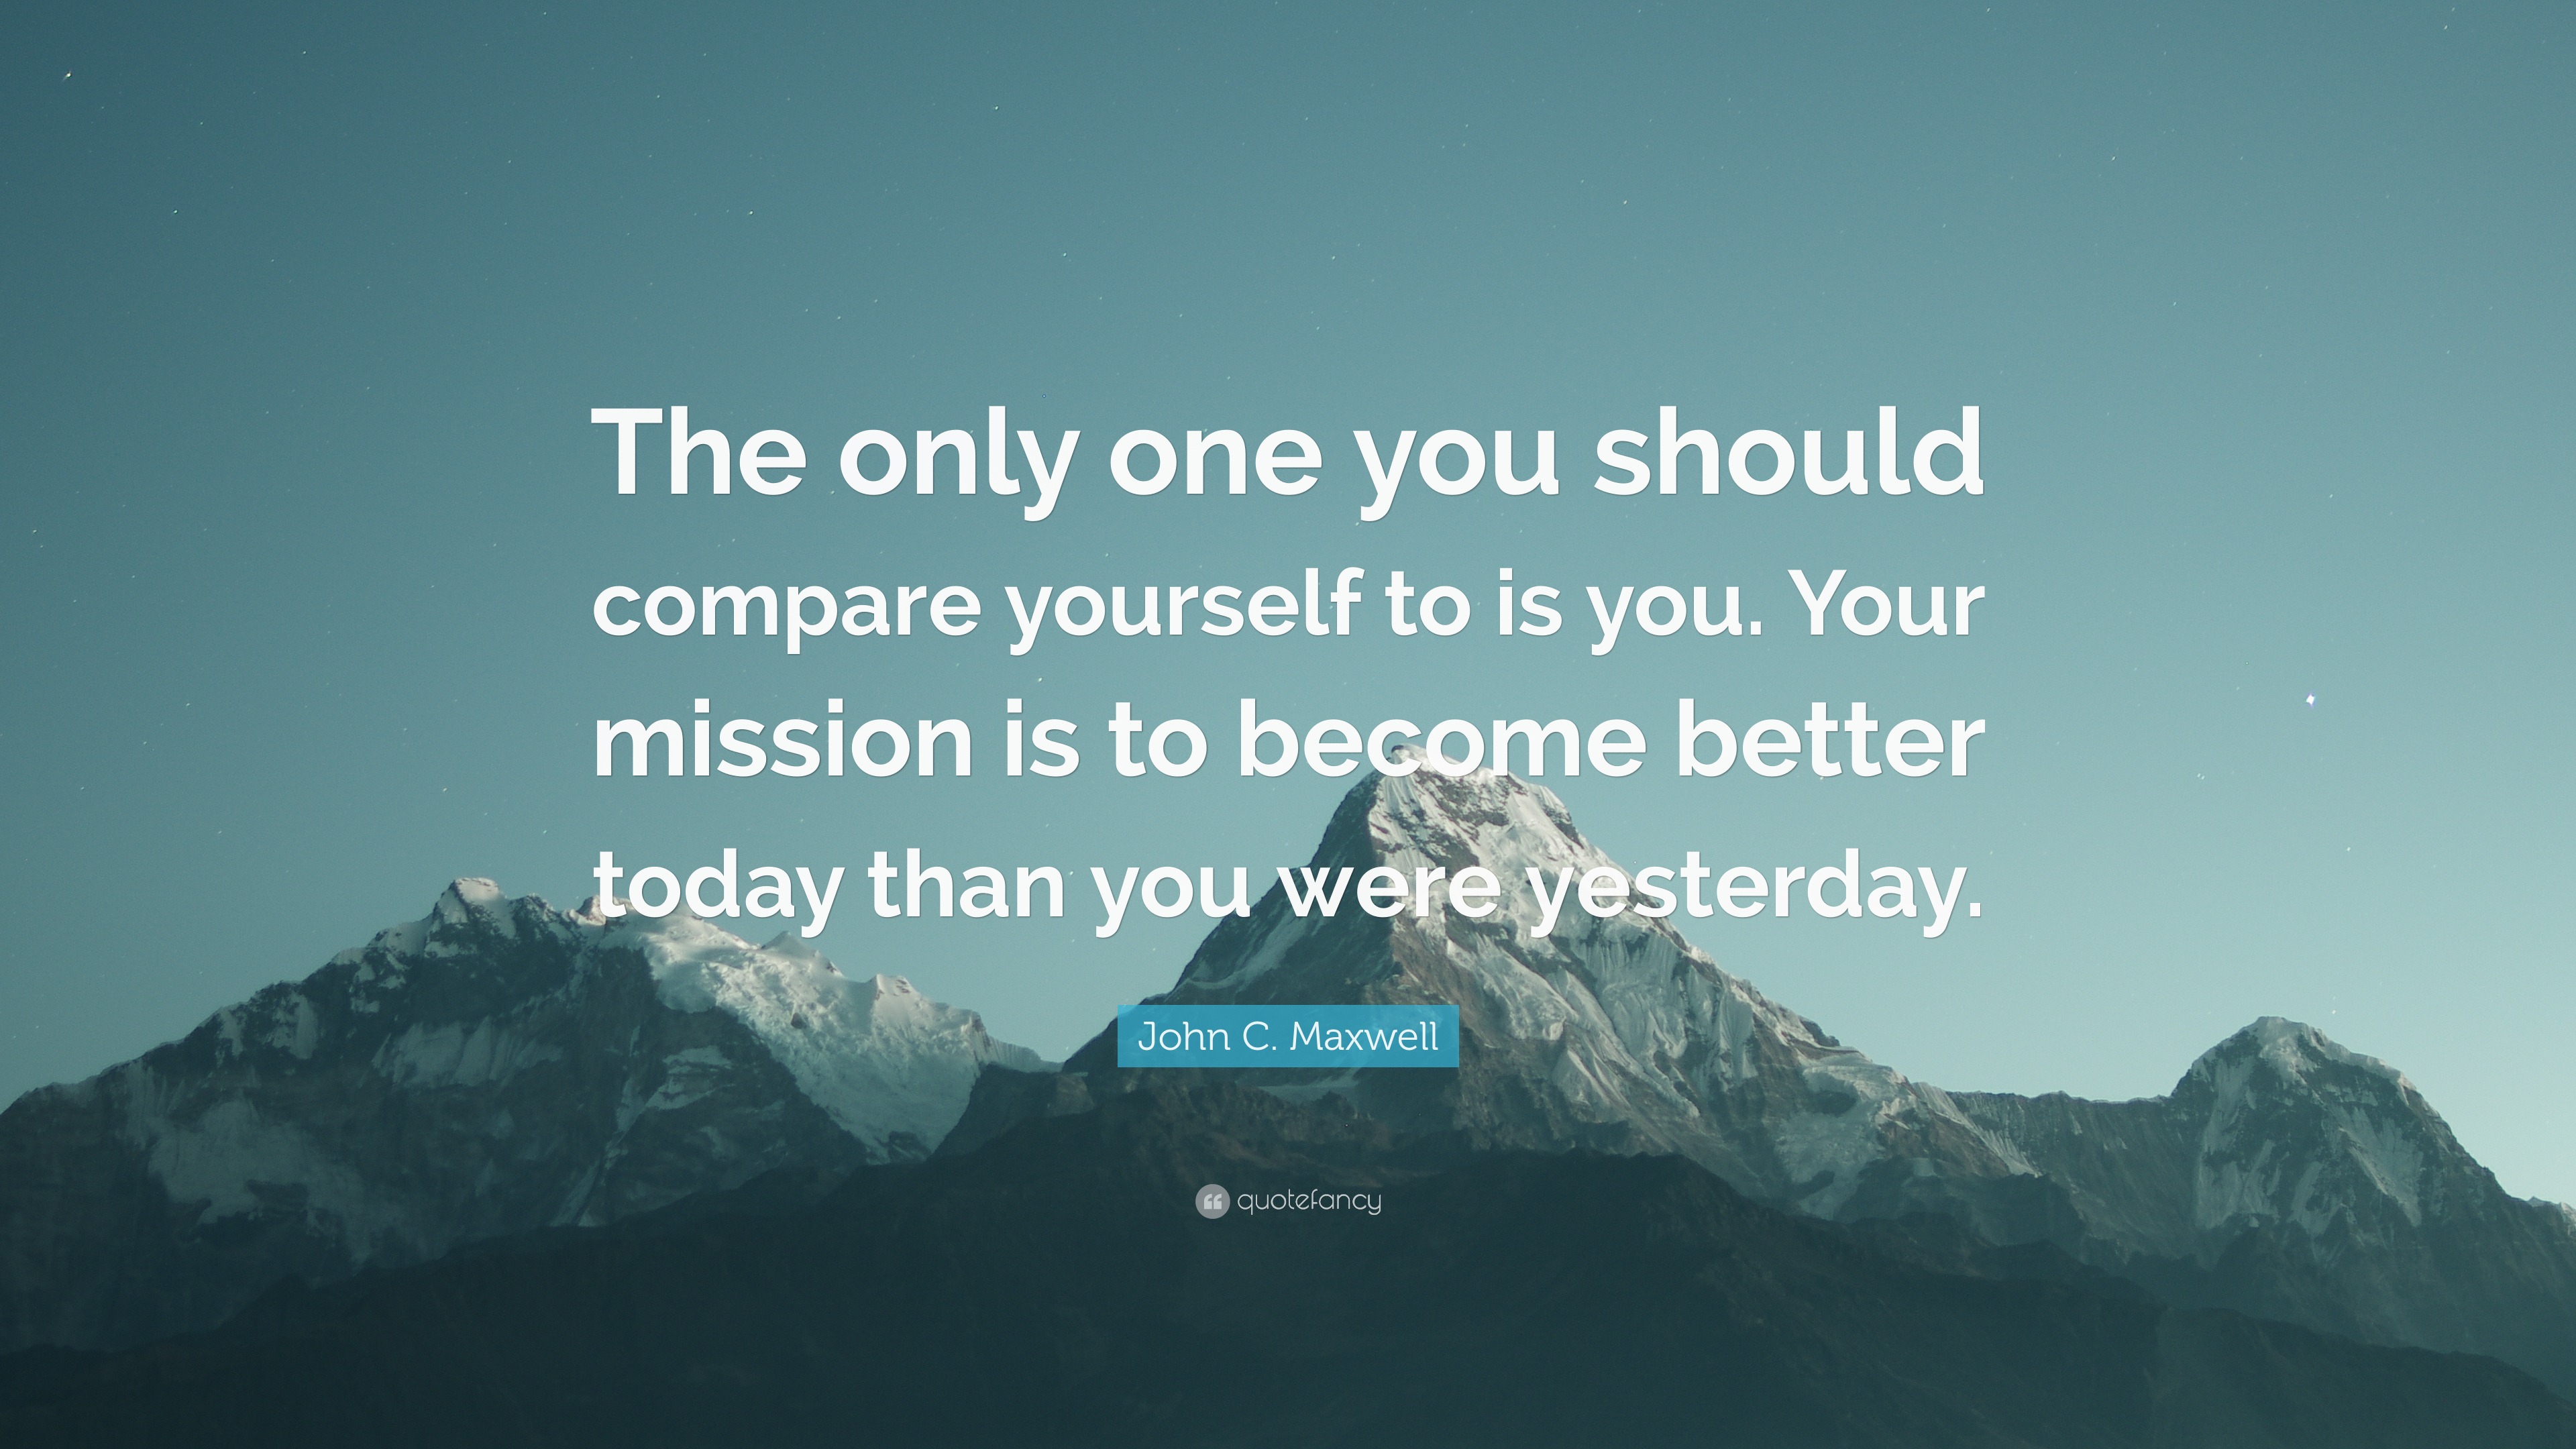 John C Maxwell Quote The Only One You Should Compare Yourself To Is You Your Mission